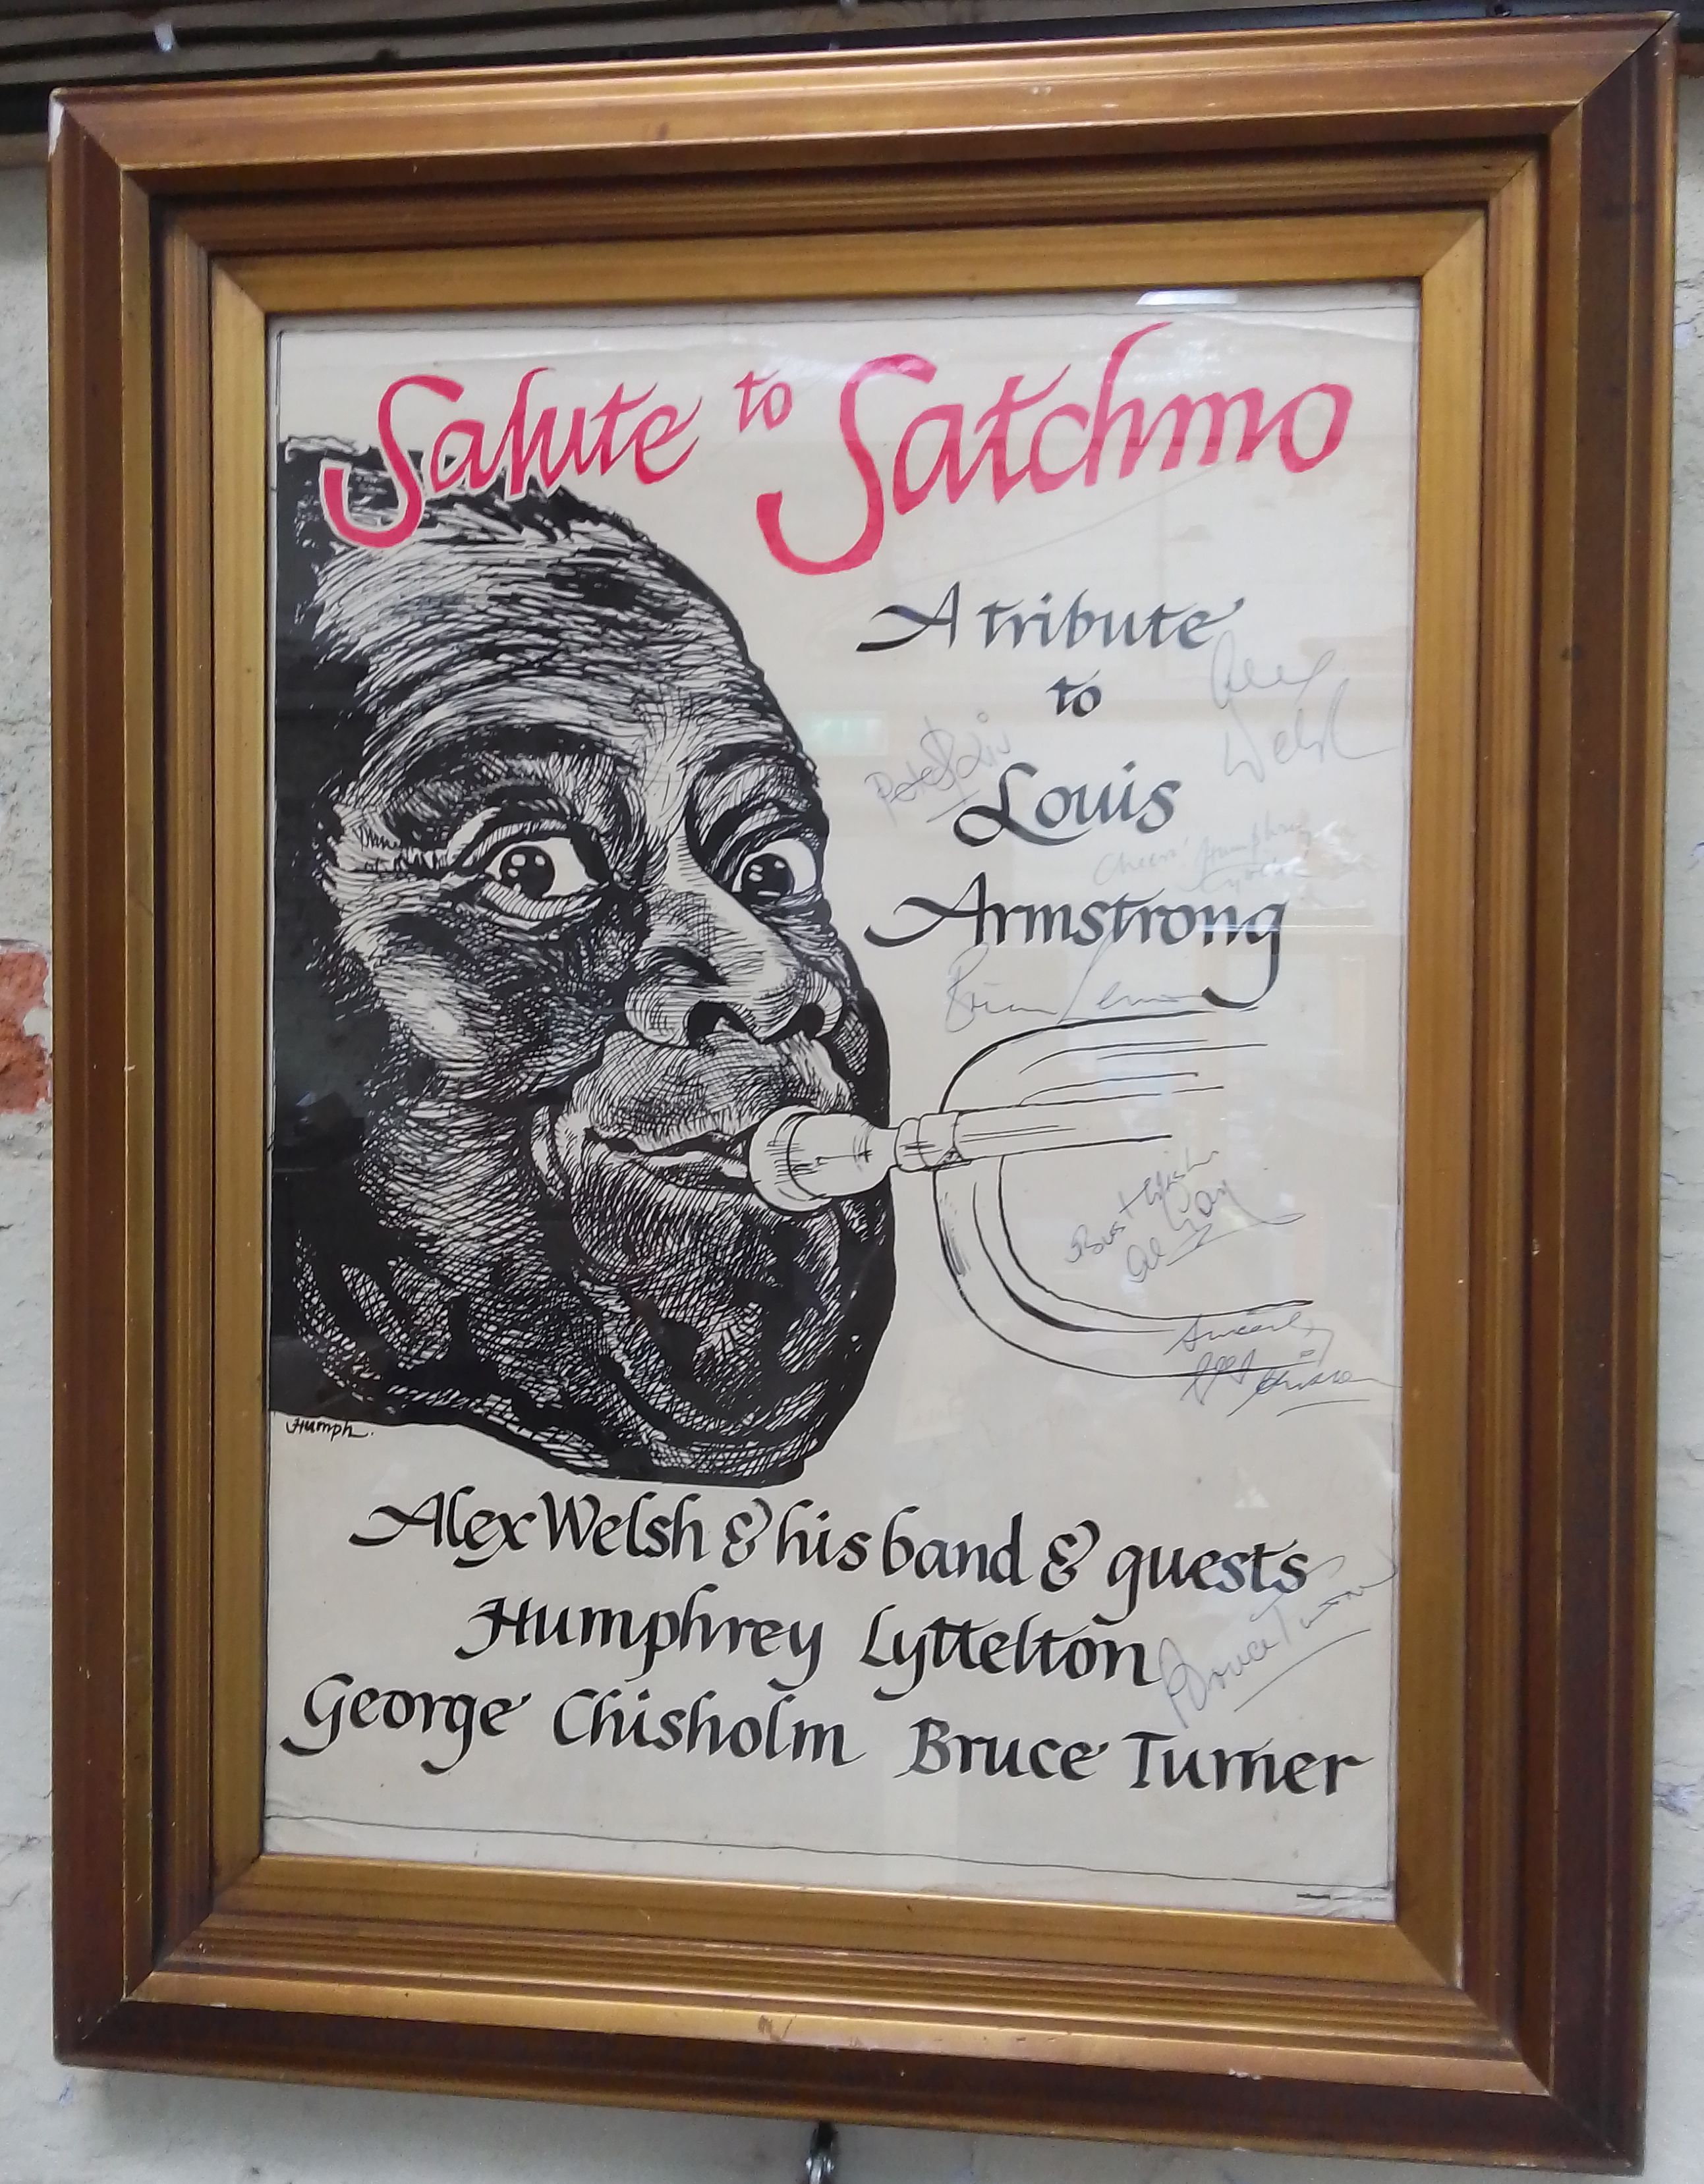 An autographed jazz poster "Salute To Satchmo", glazed and framed, total 55cm x 70cm.